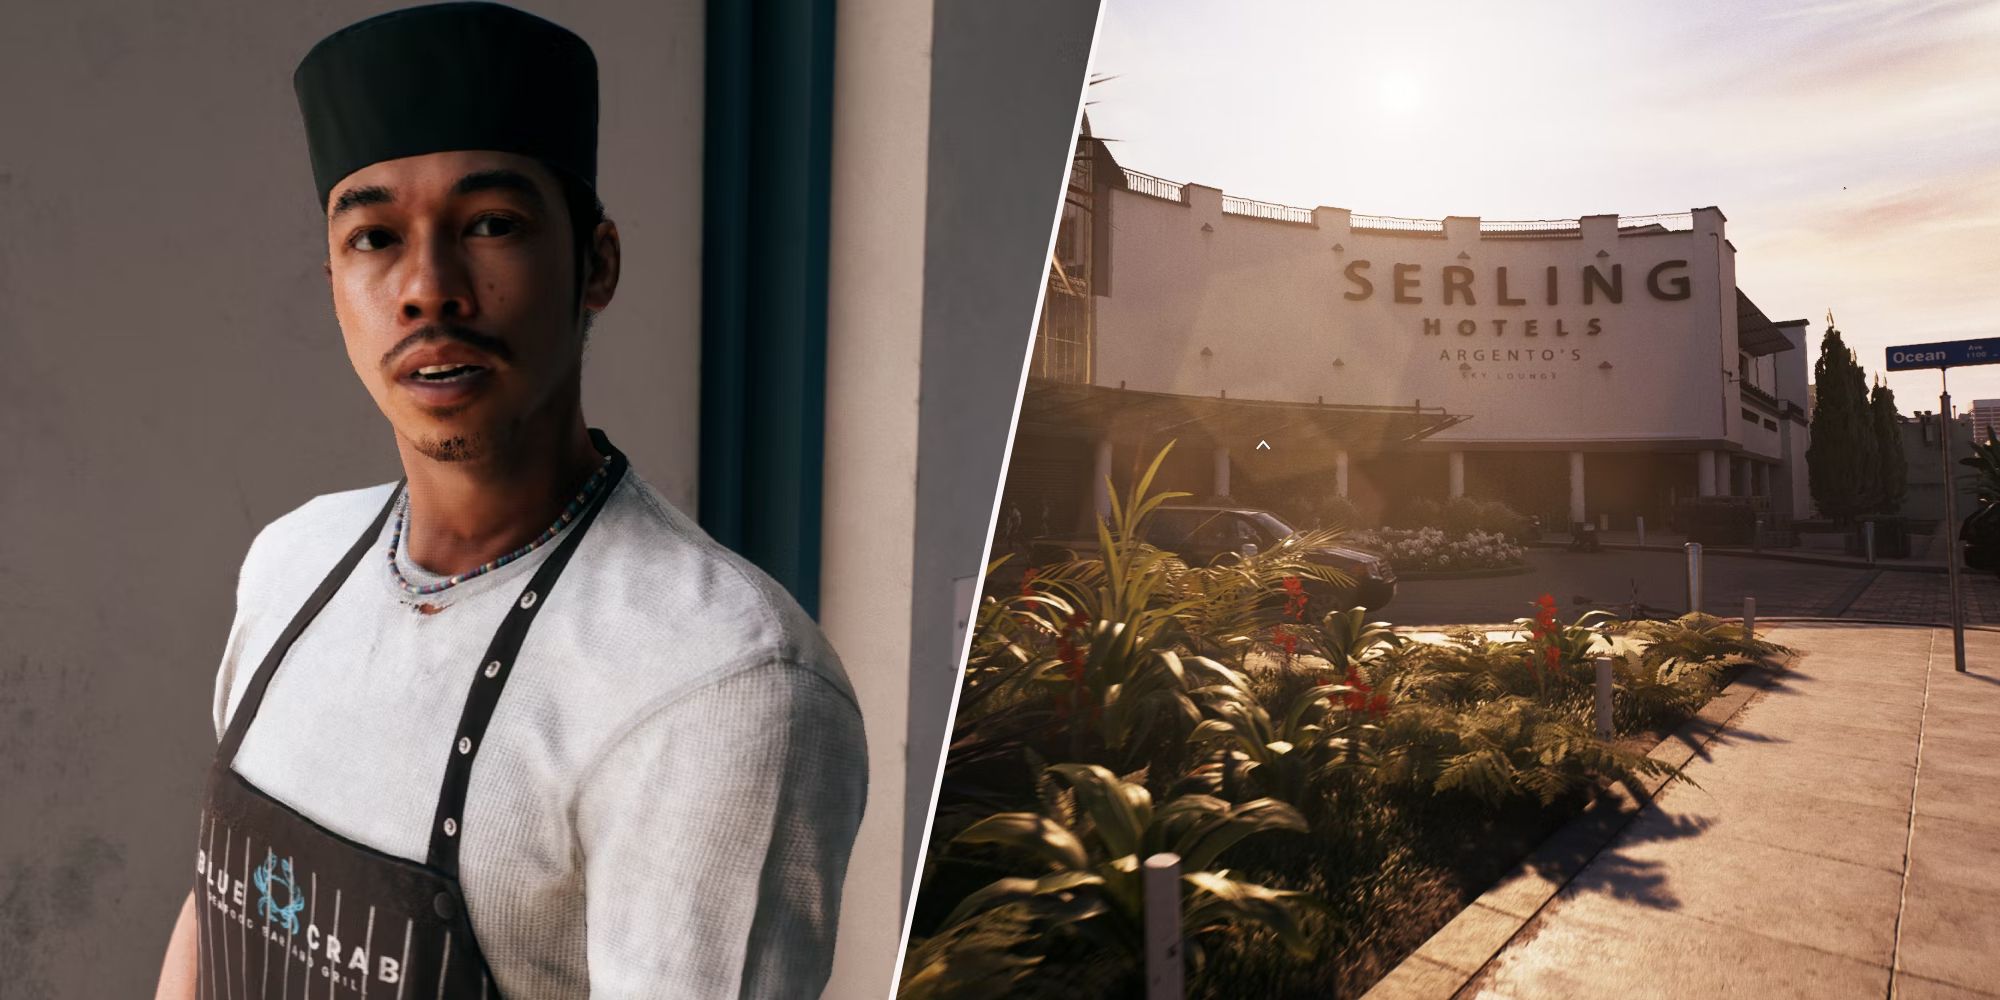 Dead Island 2: a worker and the Serling Hotels